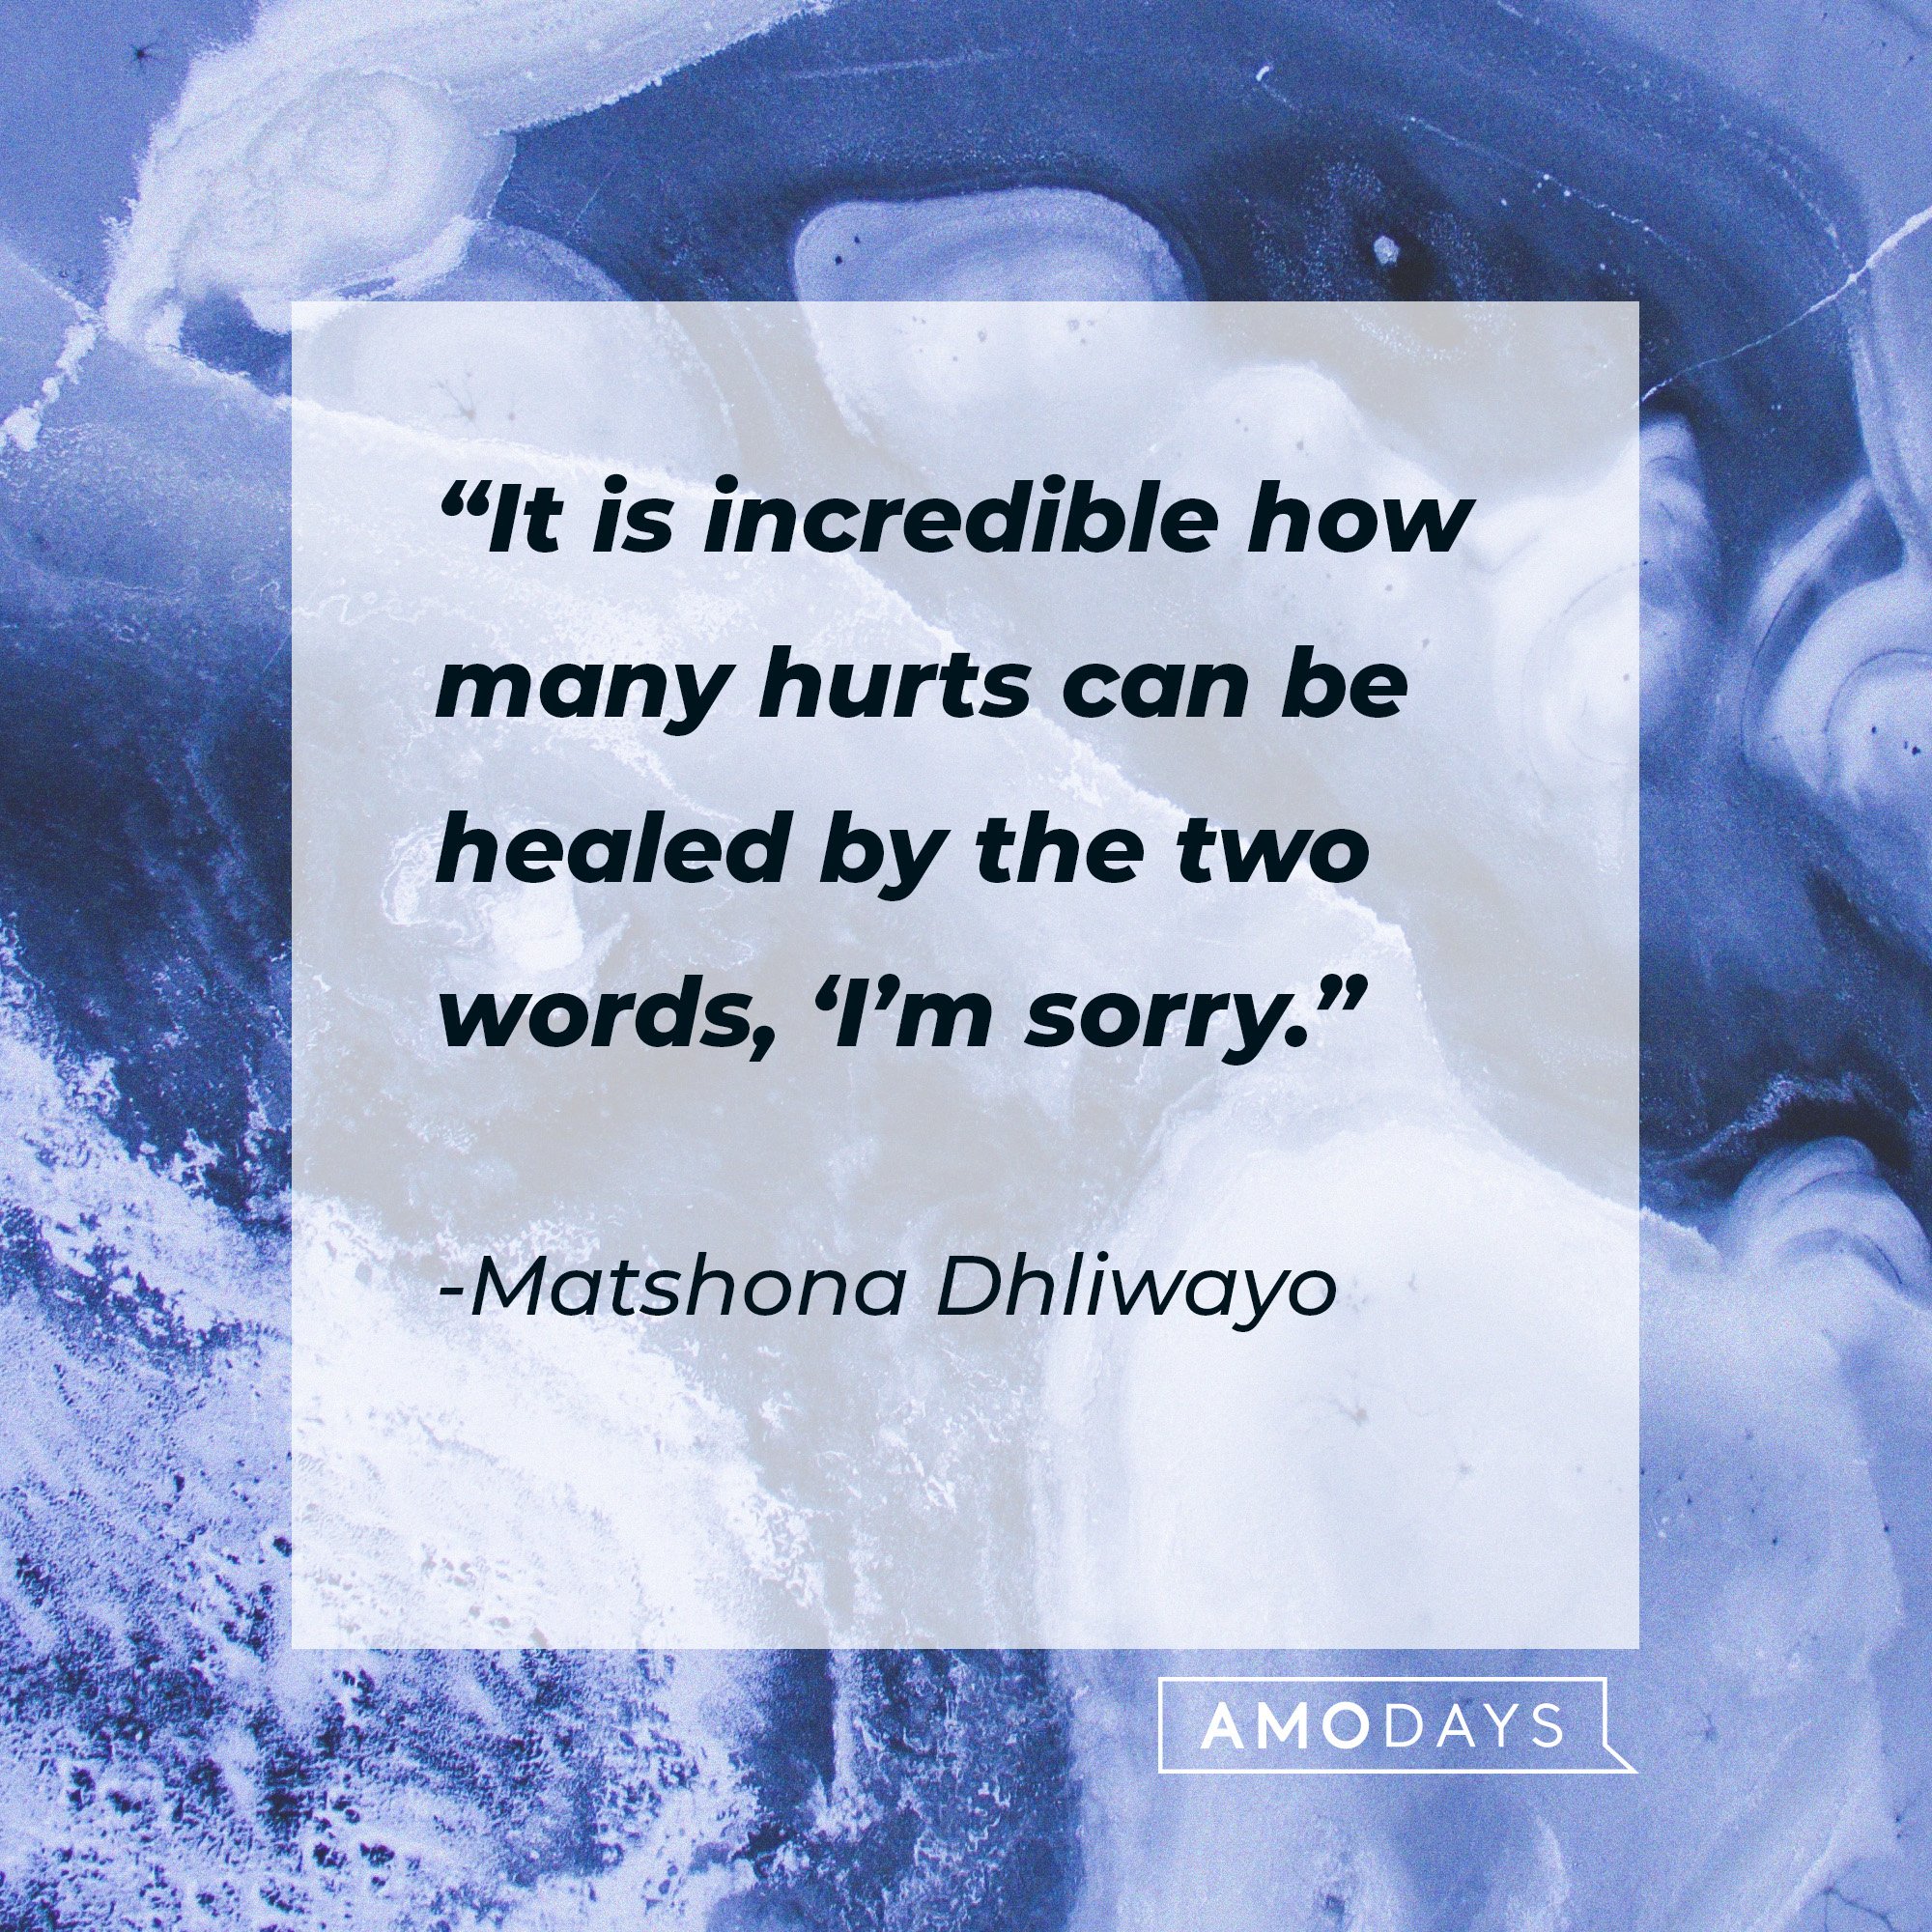  Matshona Dhliwayo's quote: “It is incredible how many hurts can be healed by the two words, ‘I’m sorry.” | Image: AmoDays